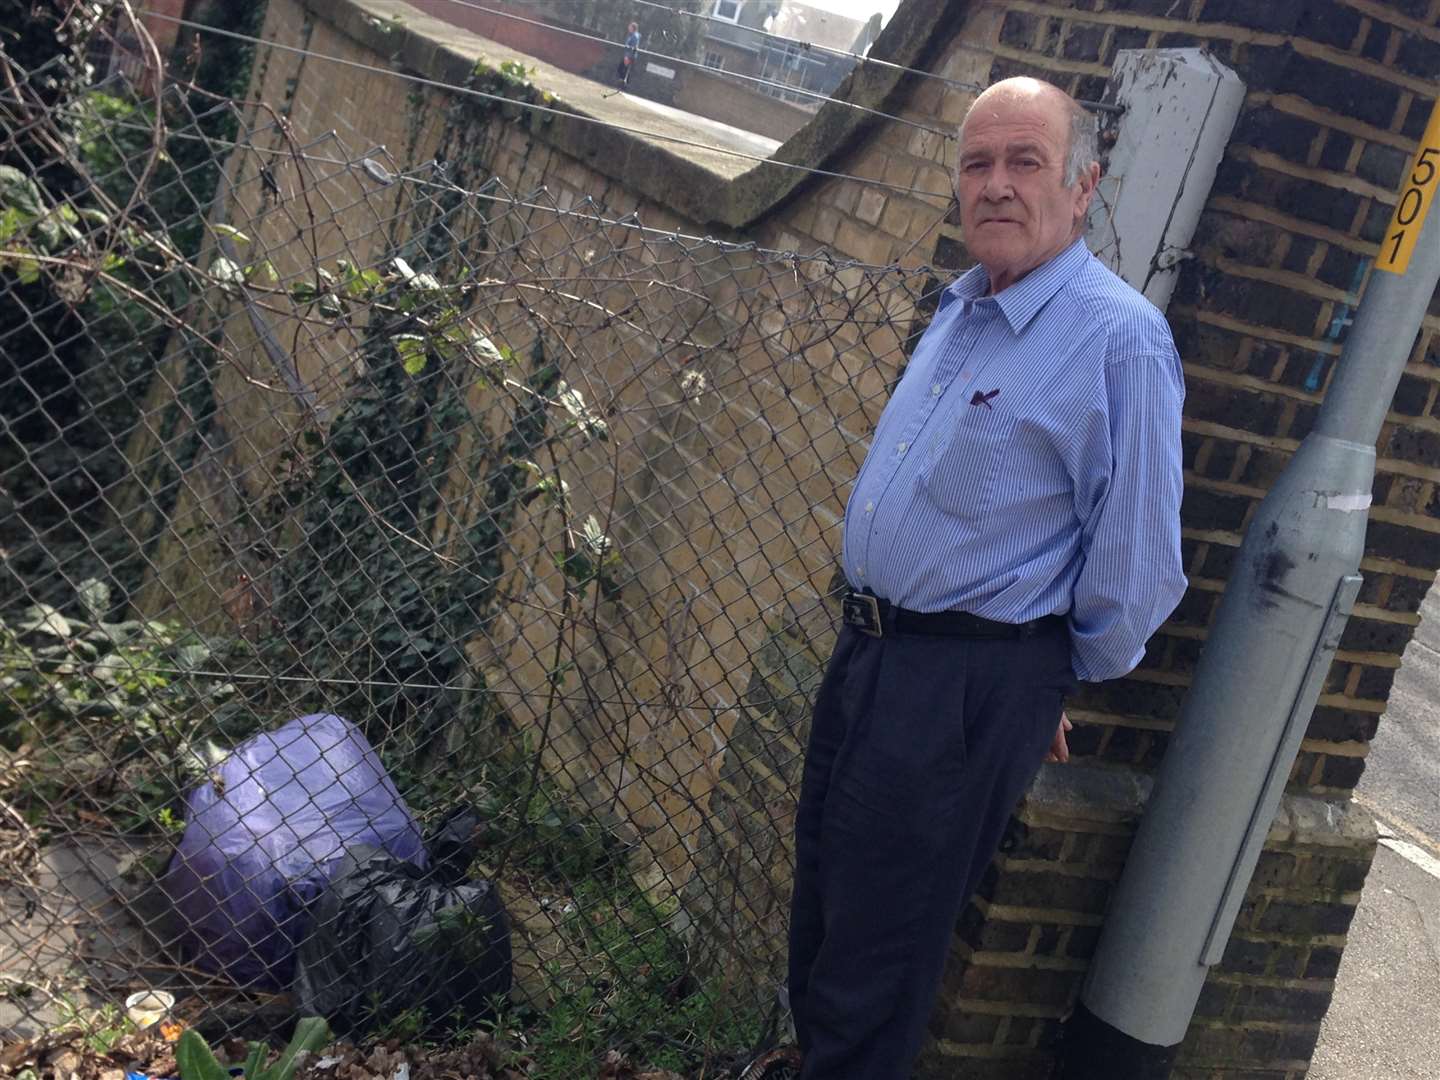 "What posesses people?" Filled rubbish sacks are dumped instead of disposed of responsibly